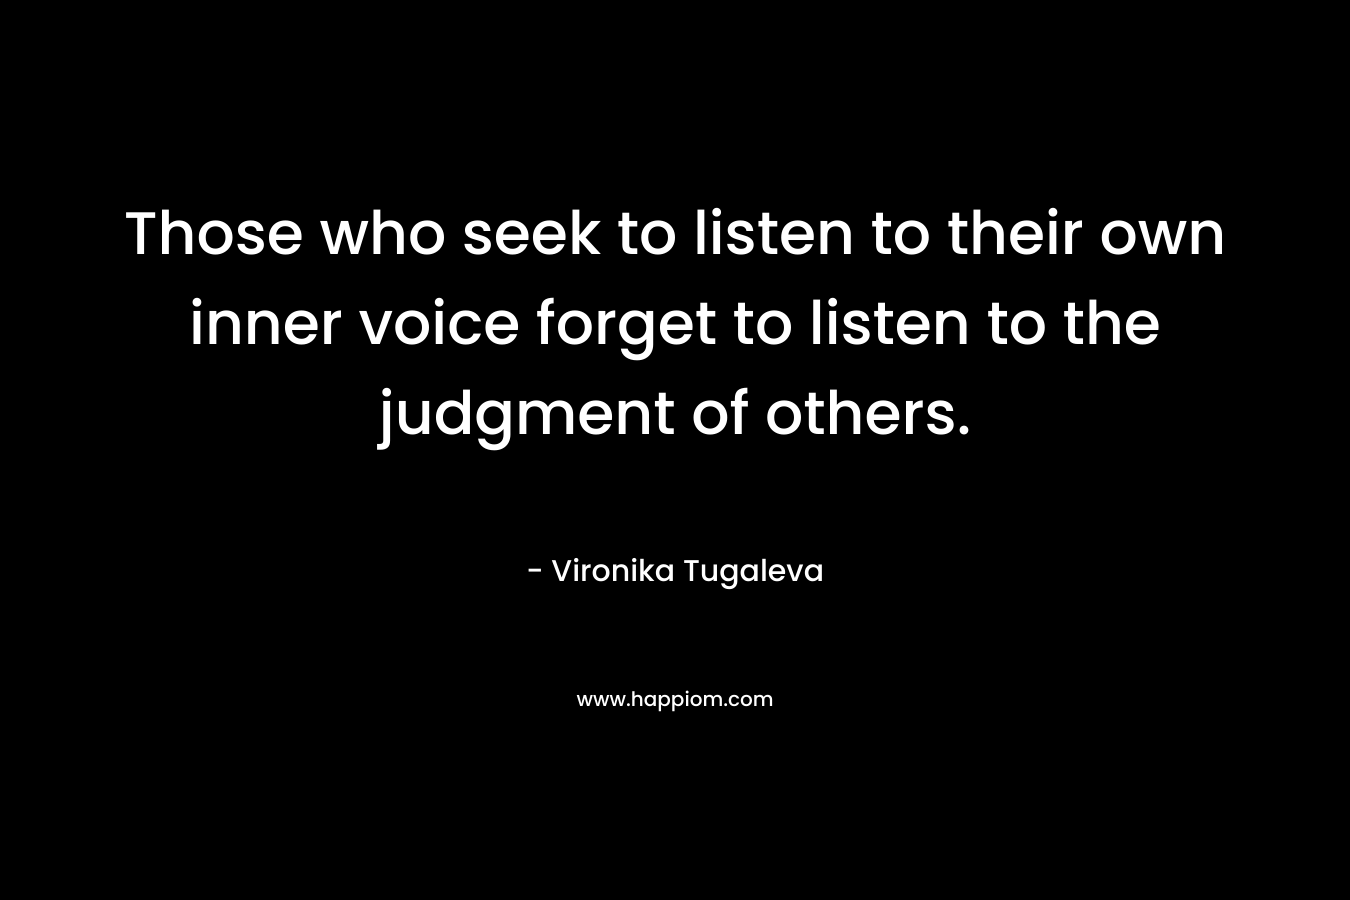 Those who seek to listen to their own inner voice forget to listen to the judgment of others.